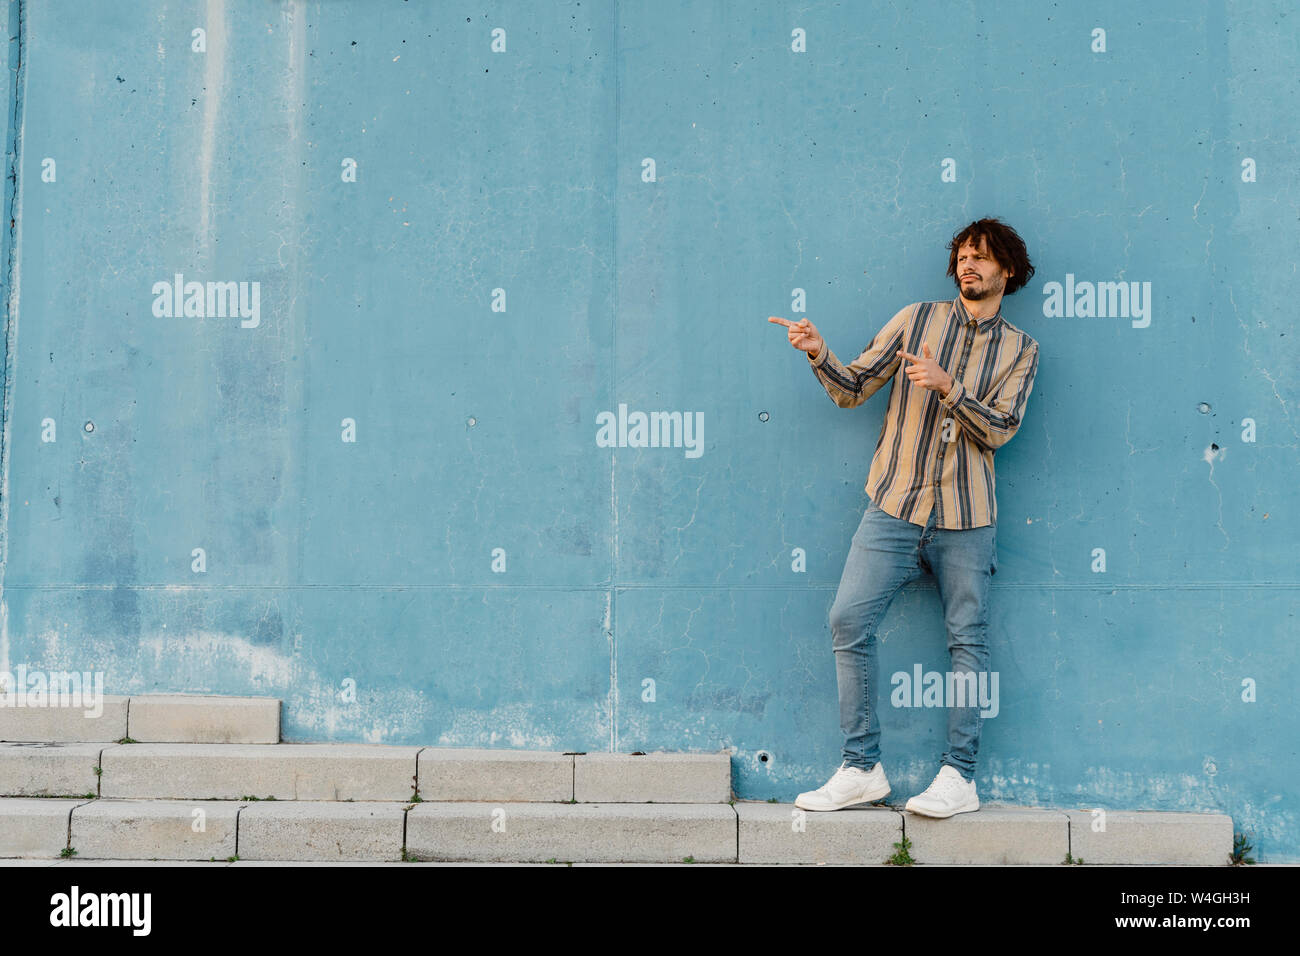 Bearded man wearing striped shirt standing ibn front of light blue wall gesticulating Stock Photo